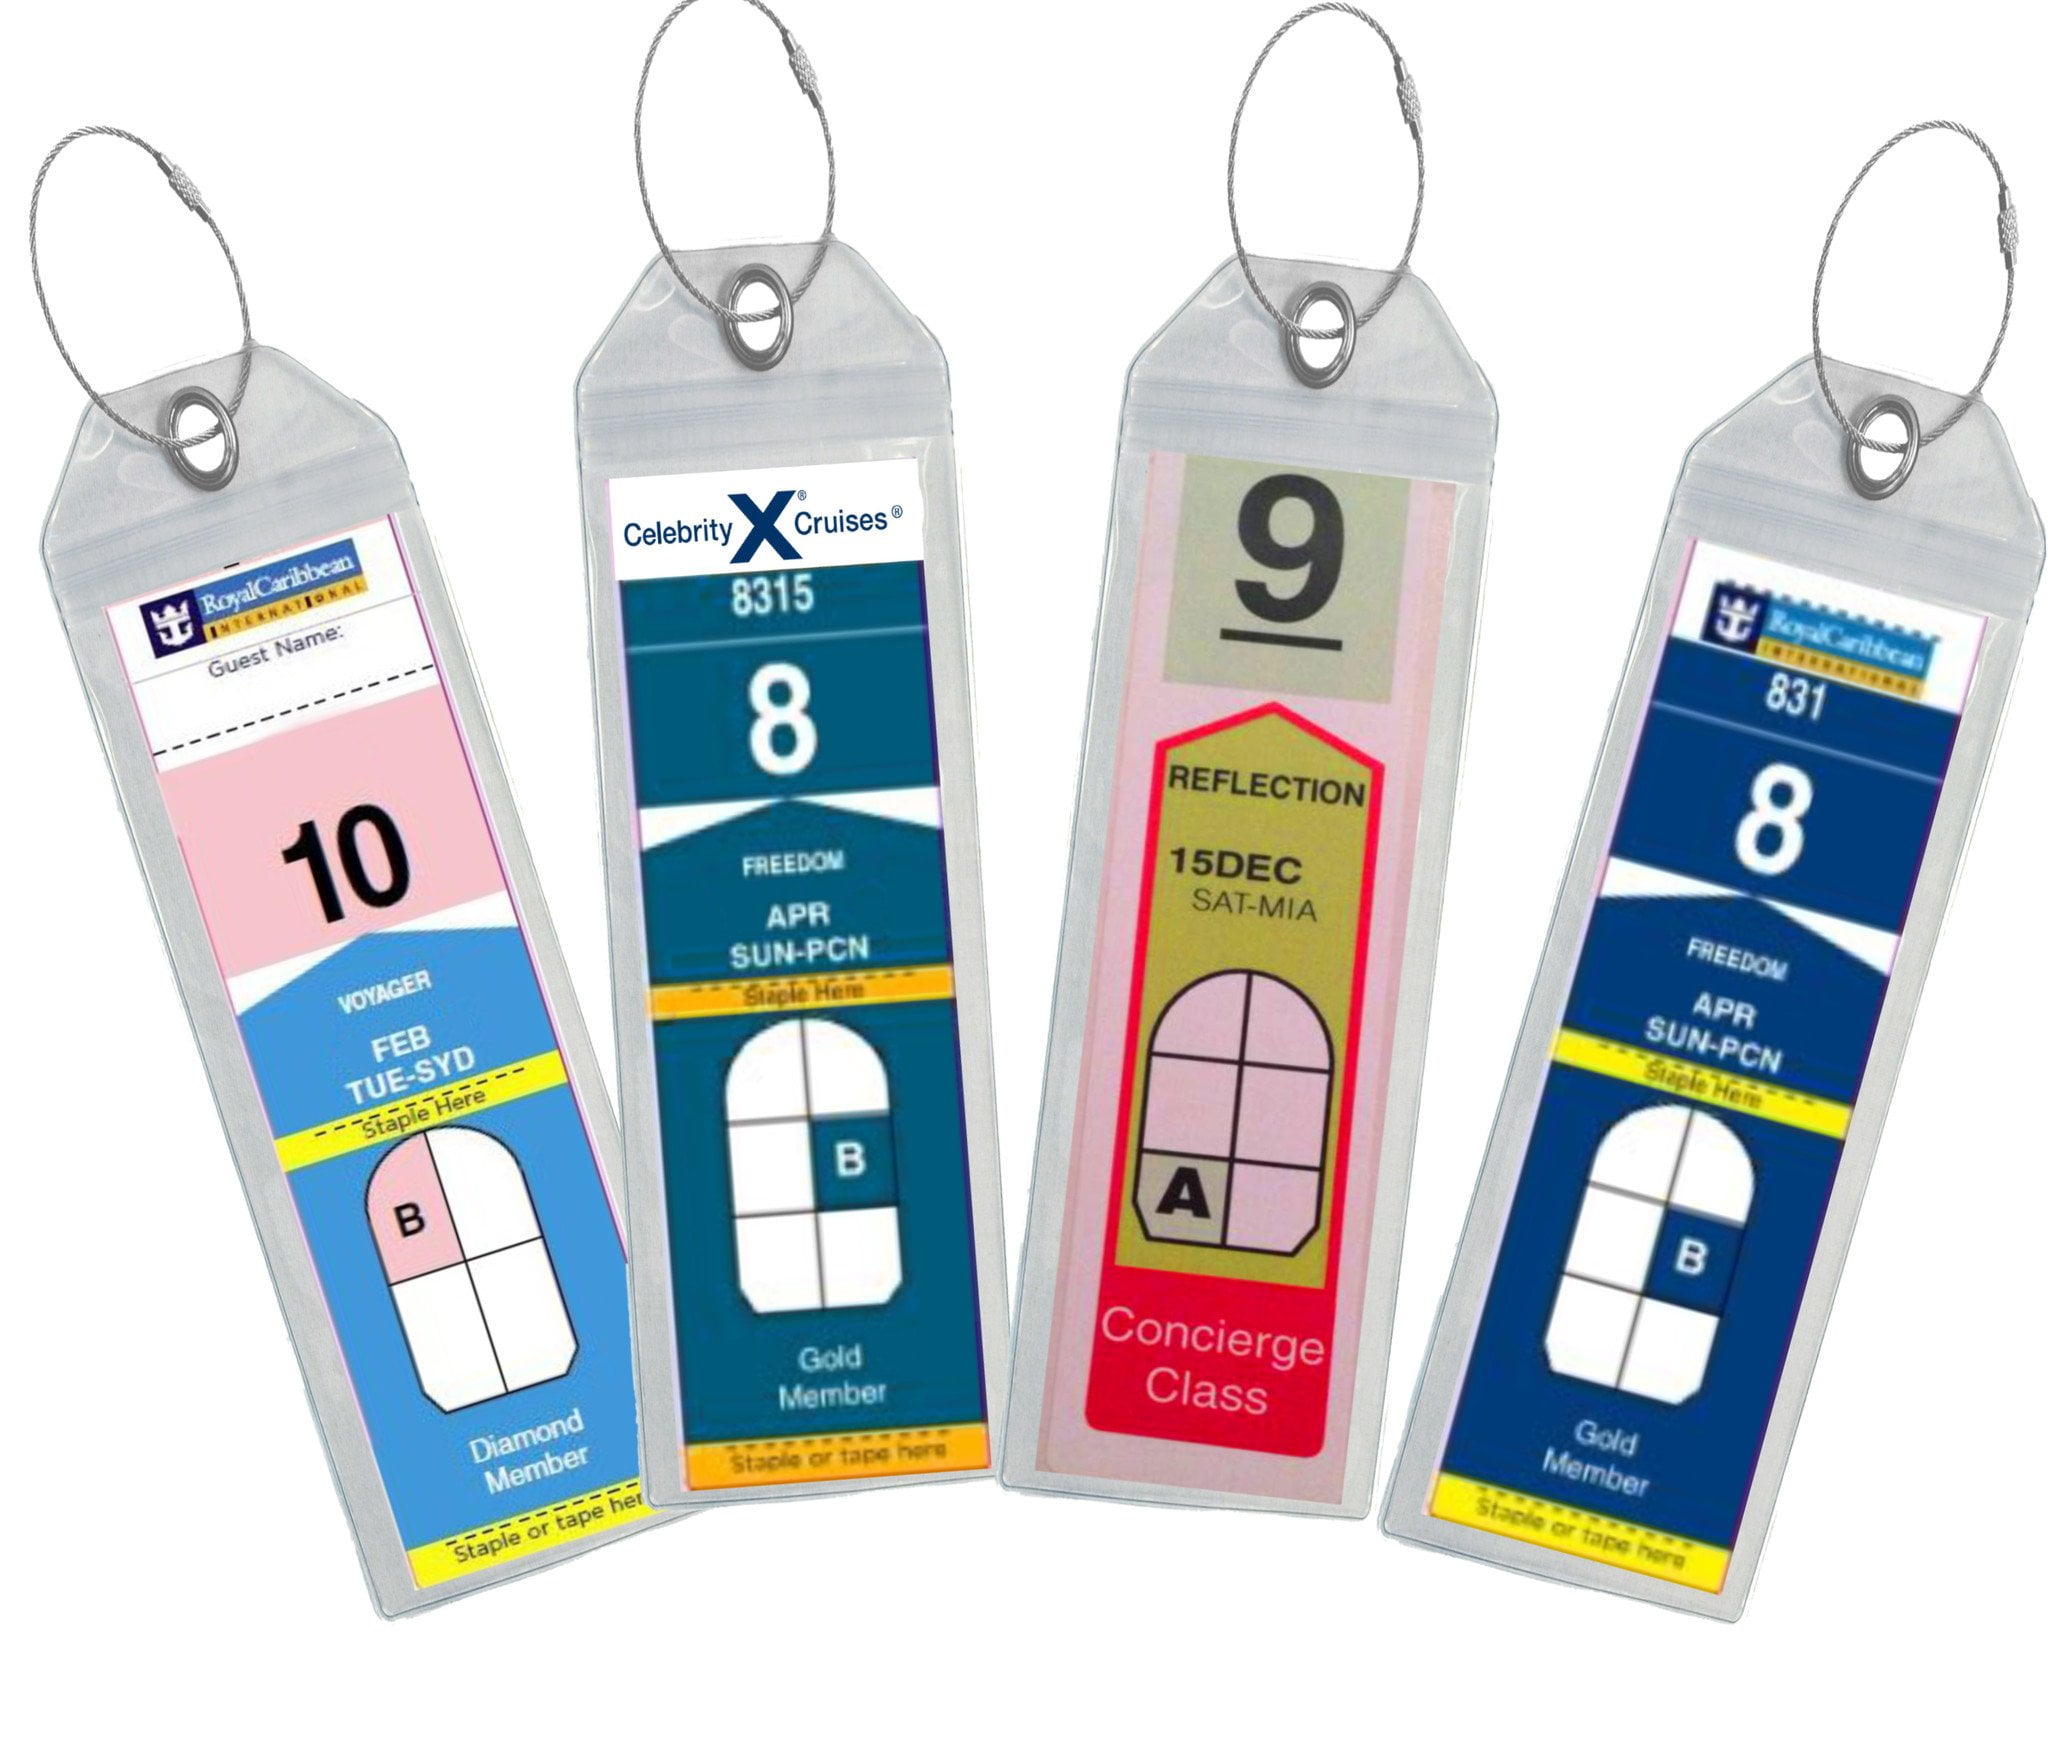 Narrow Luggage E-tag Holders Zip Seal & Steel Loops Thick PVC for Cruise Ships Cruise Luggage Tags 